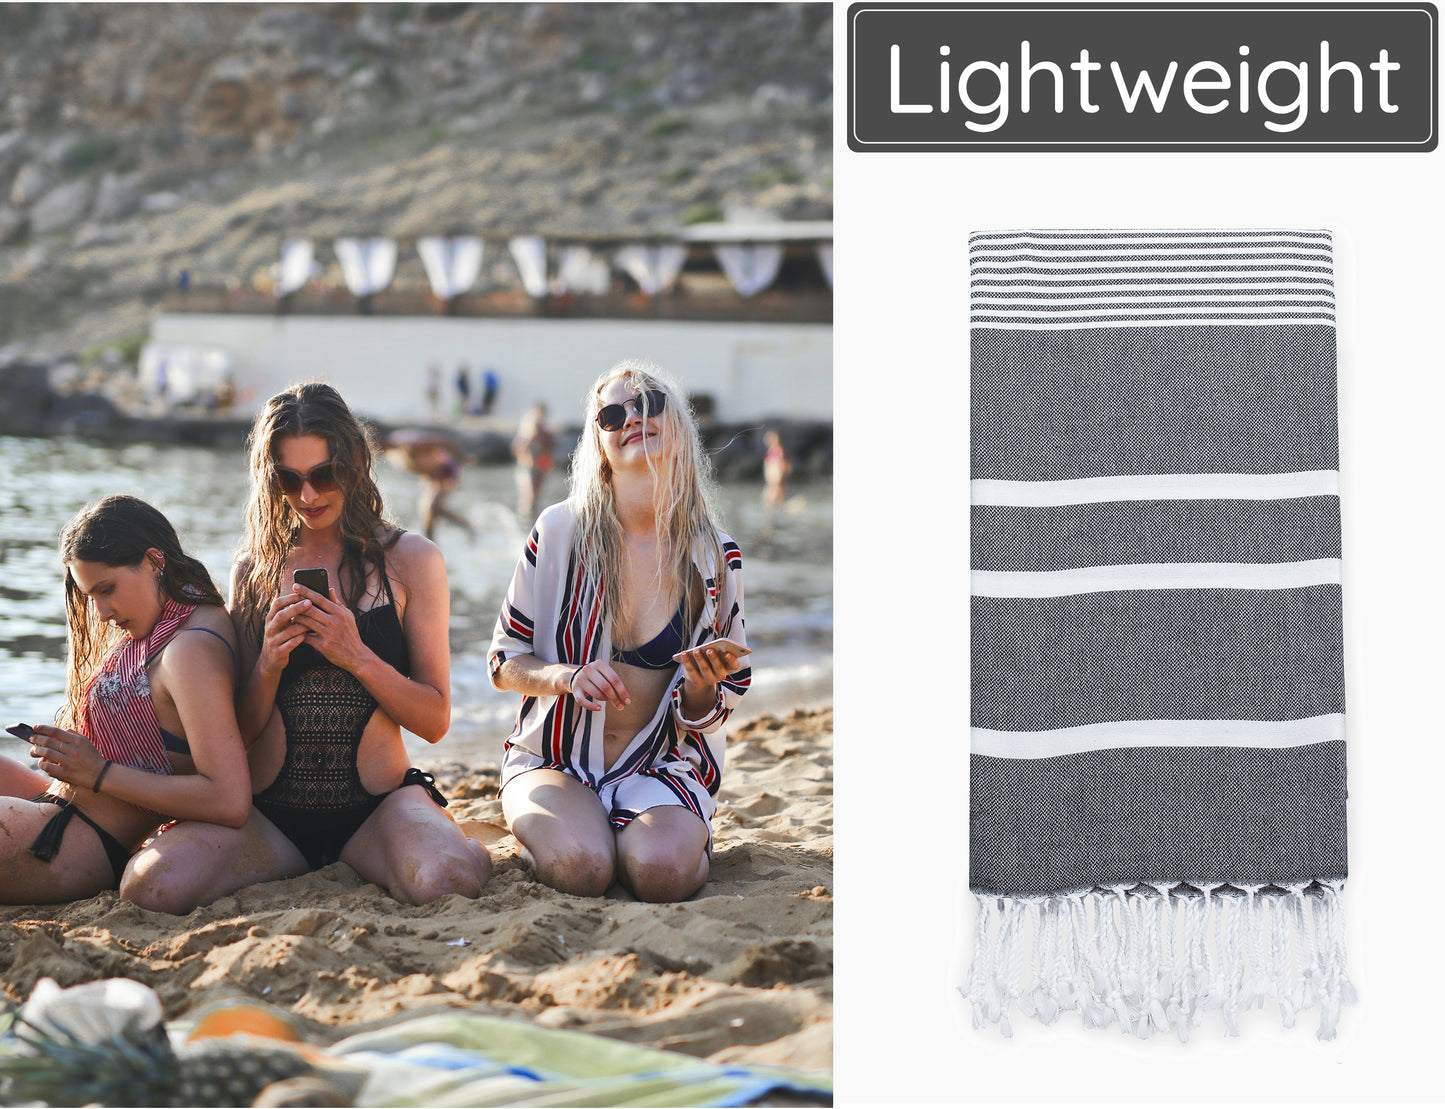 2 Packs Cotton Turkish Beach Towels Quick Dry Sand Free Oversized